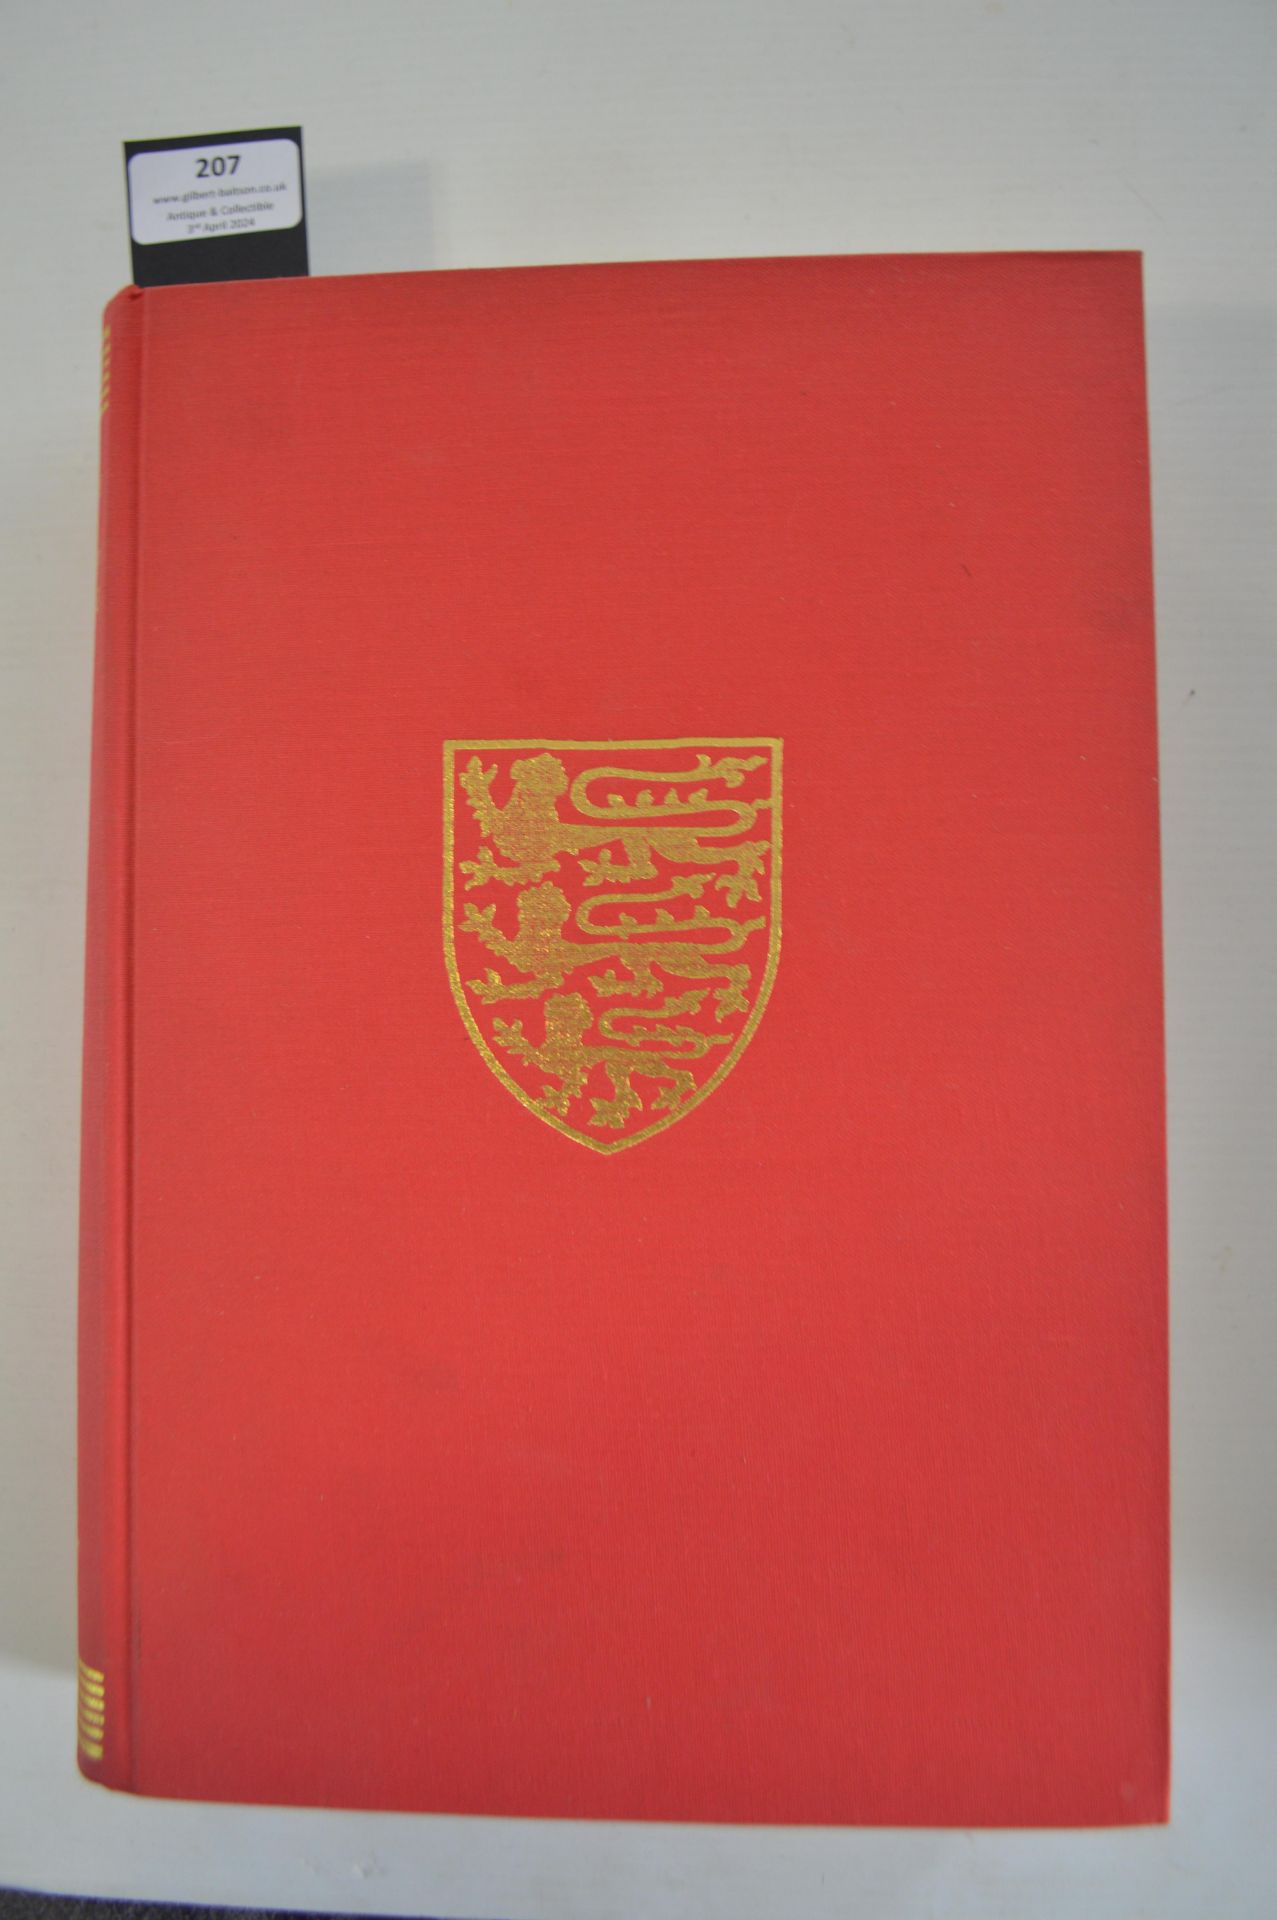 The Victoria History of the County of York, East Riding Volume 1 (missing dust cover)